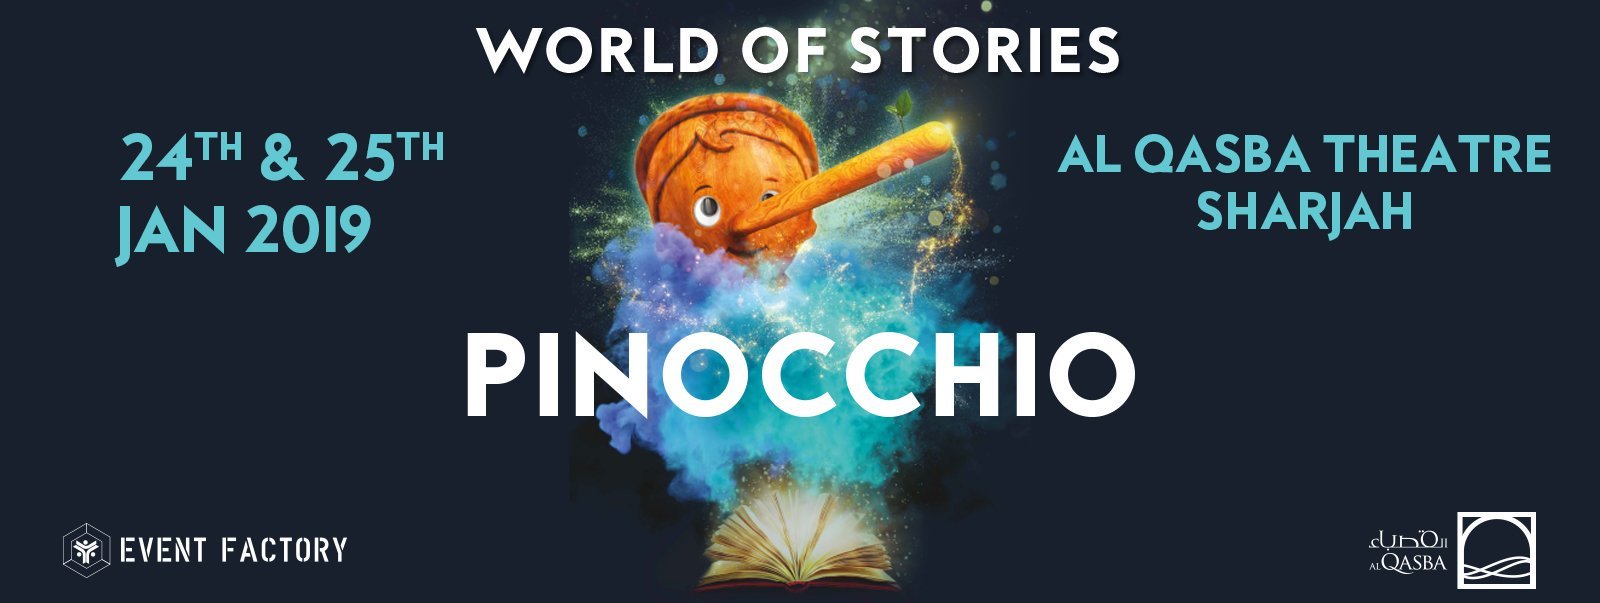 Pinocchio musical - Coming Soon in UAE